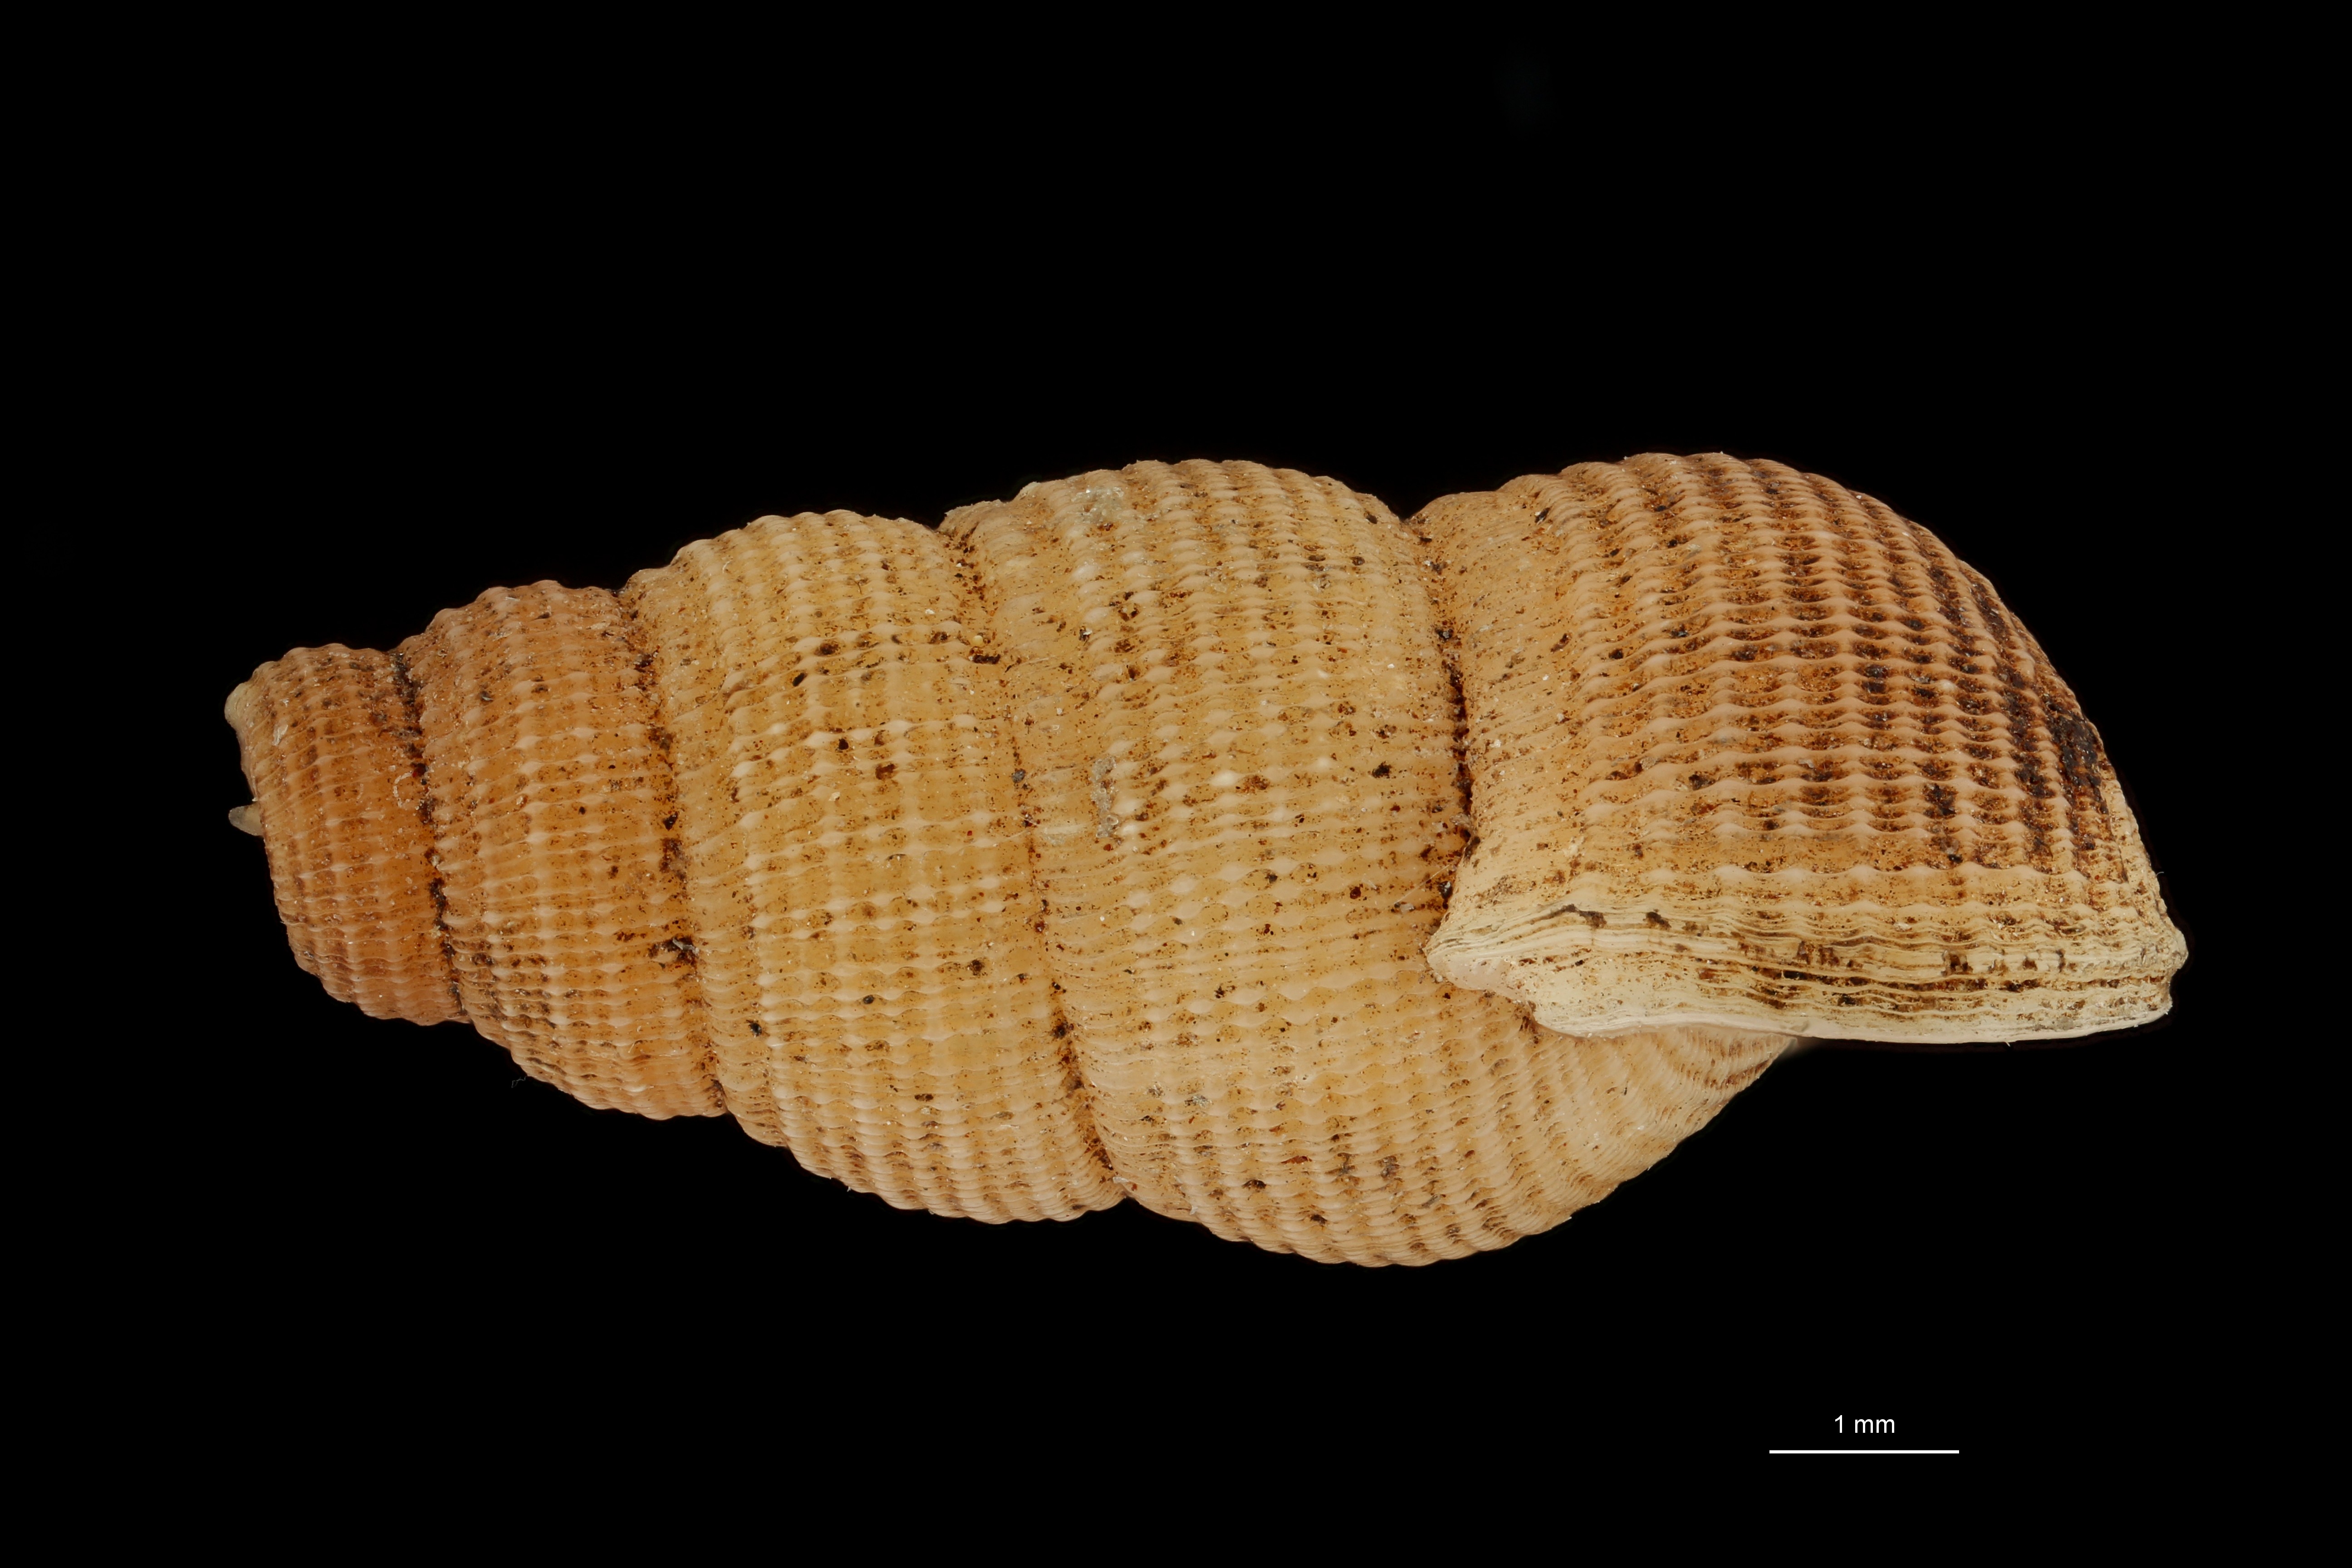 BE-RBINS-INV HOLOTYPE MT 201 Chondropoma caymanensis LATERAL ZS DMap Scaled.jpg